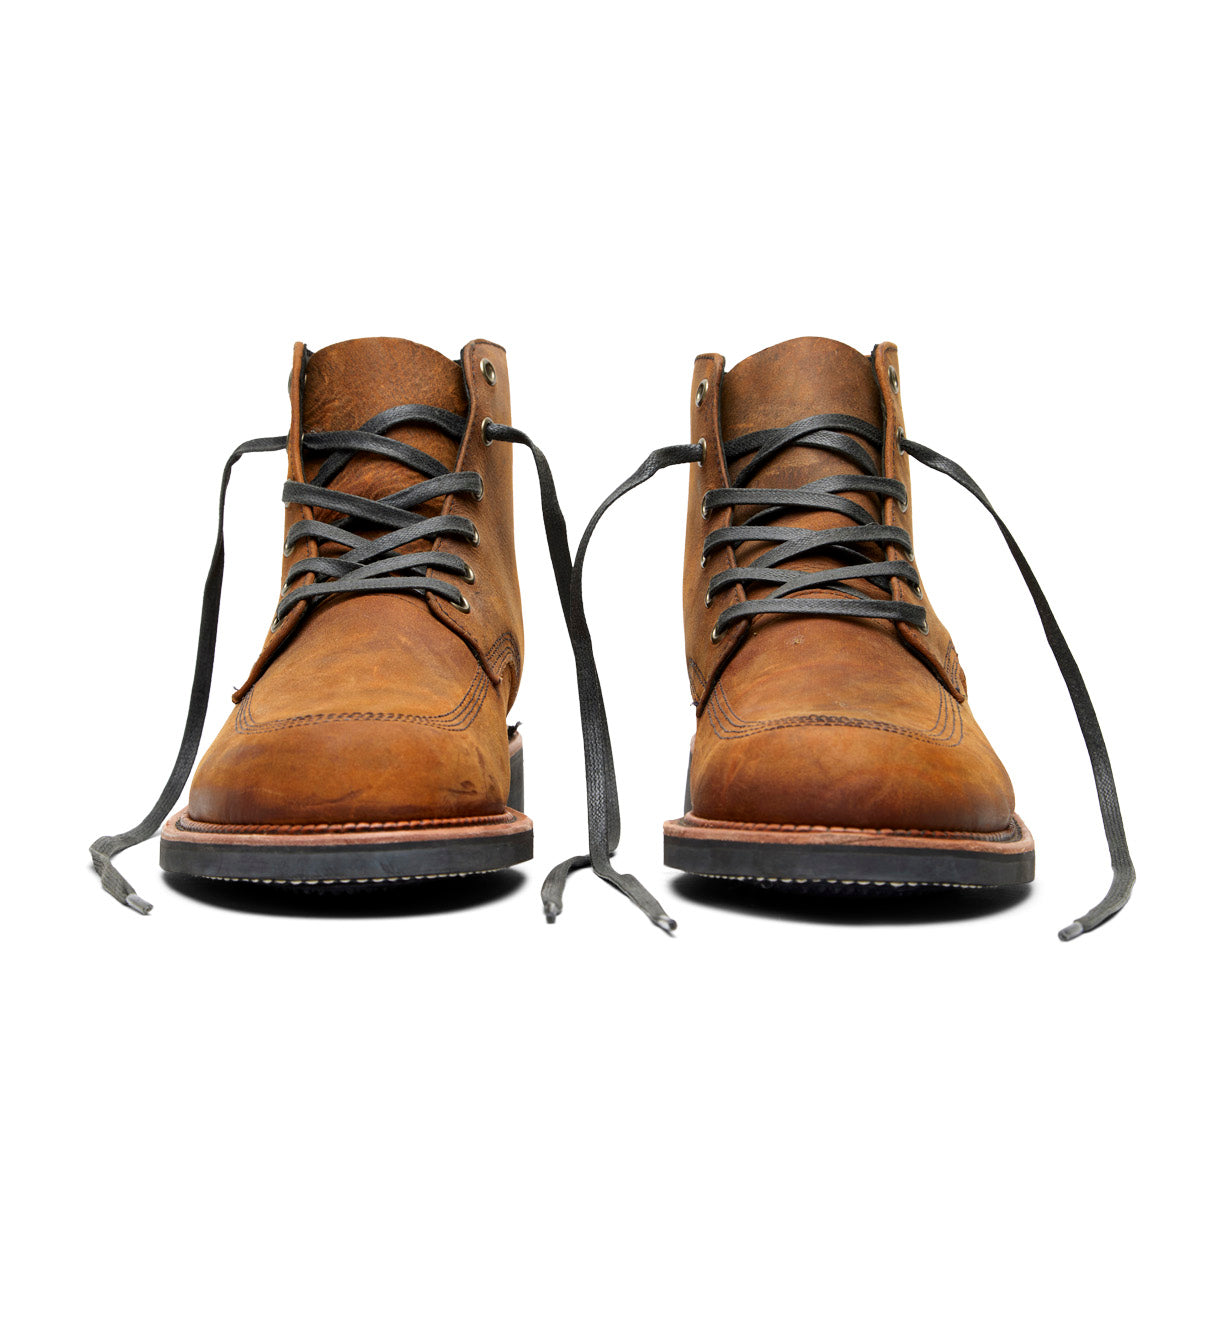 A pair of Davis boots by Broken Homme, made of brown leather with laces on a white background.